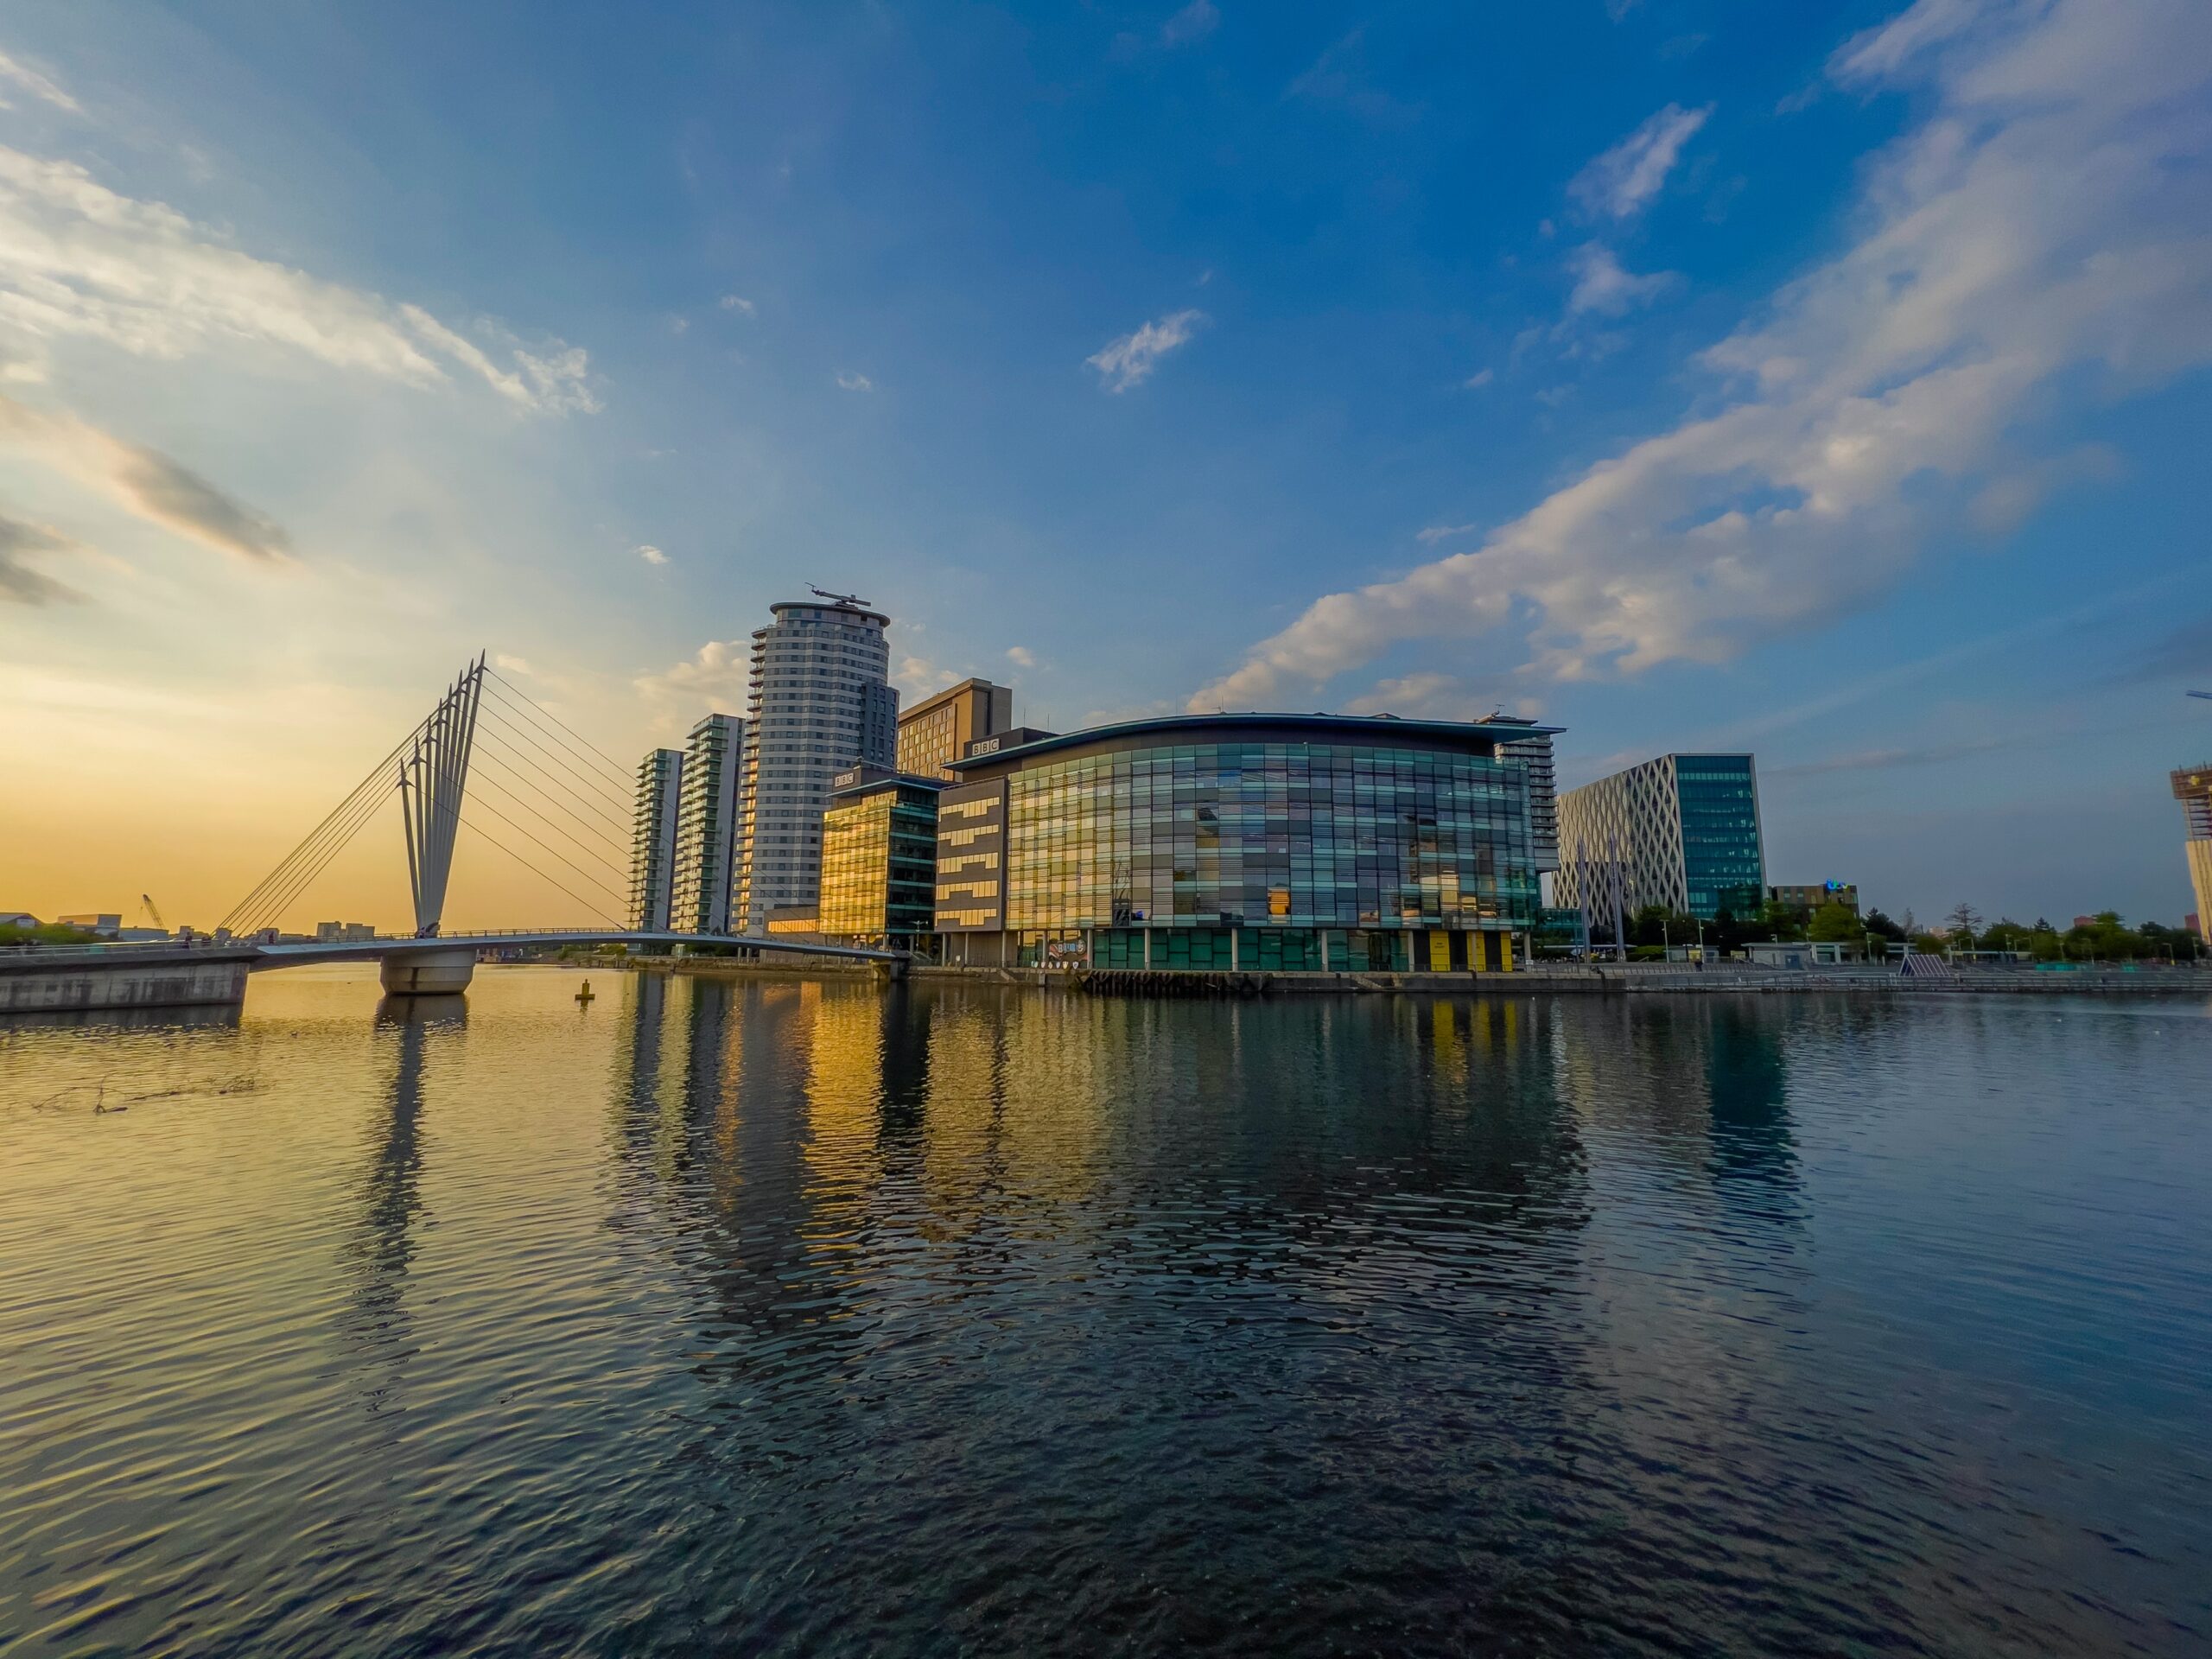 A warning has been issued about swimming in Salford Quays